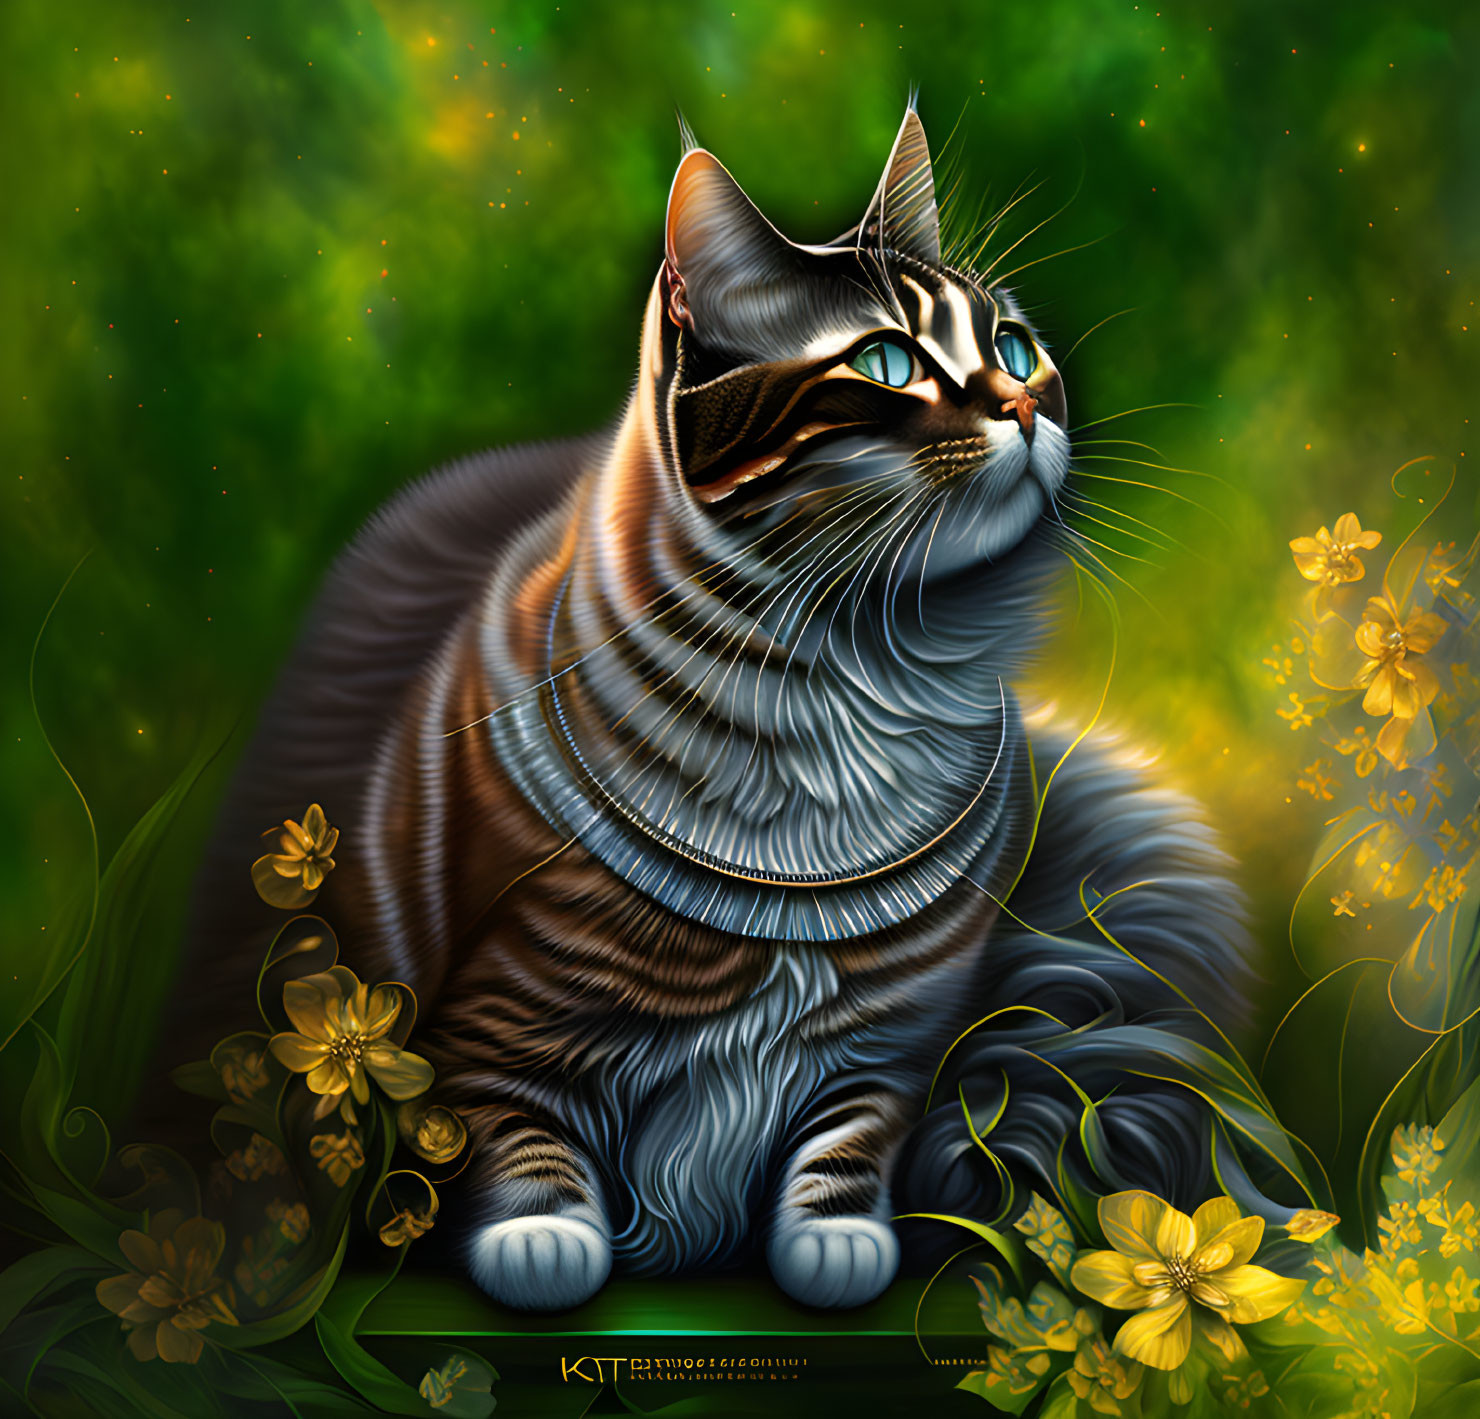 Tabby cat with green eyes in lush floral setting and shimmering aura